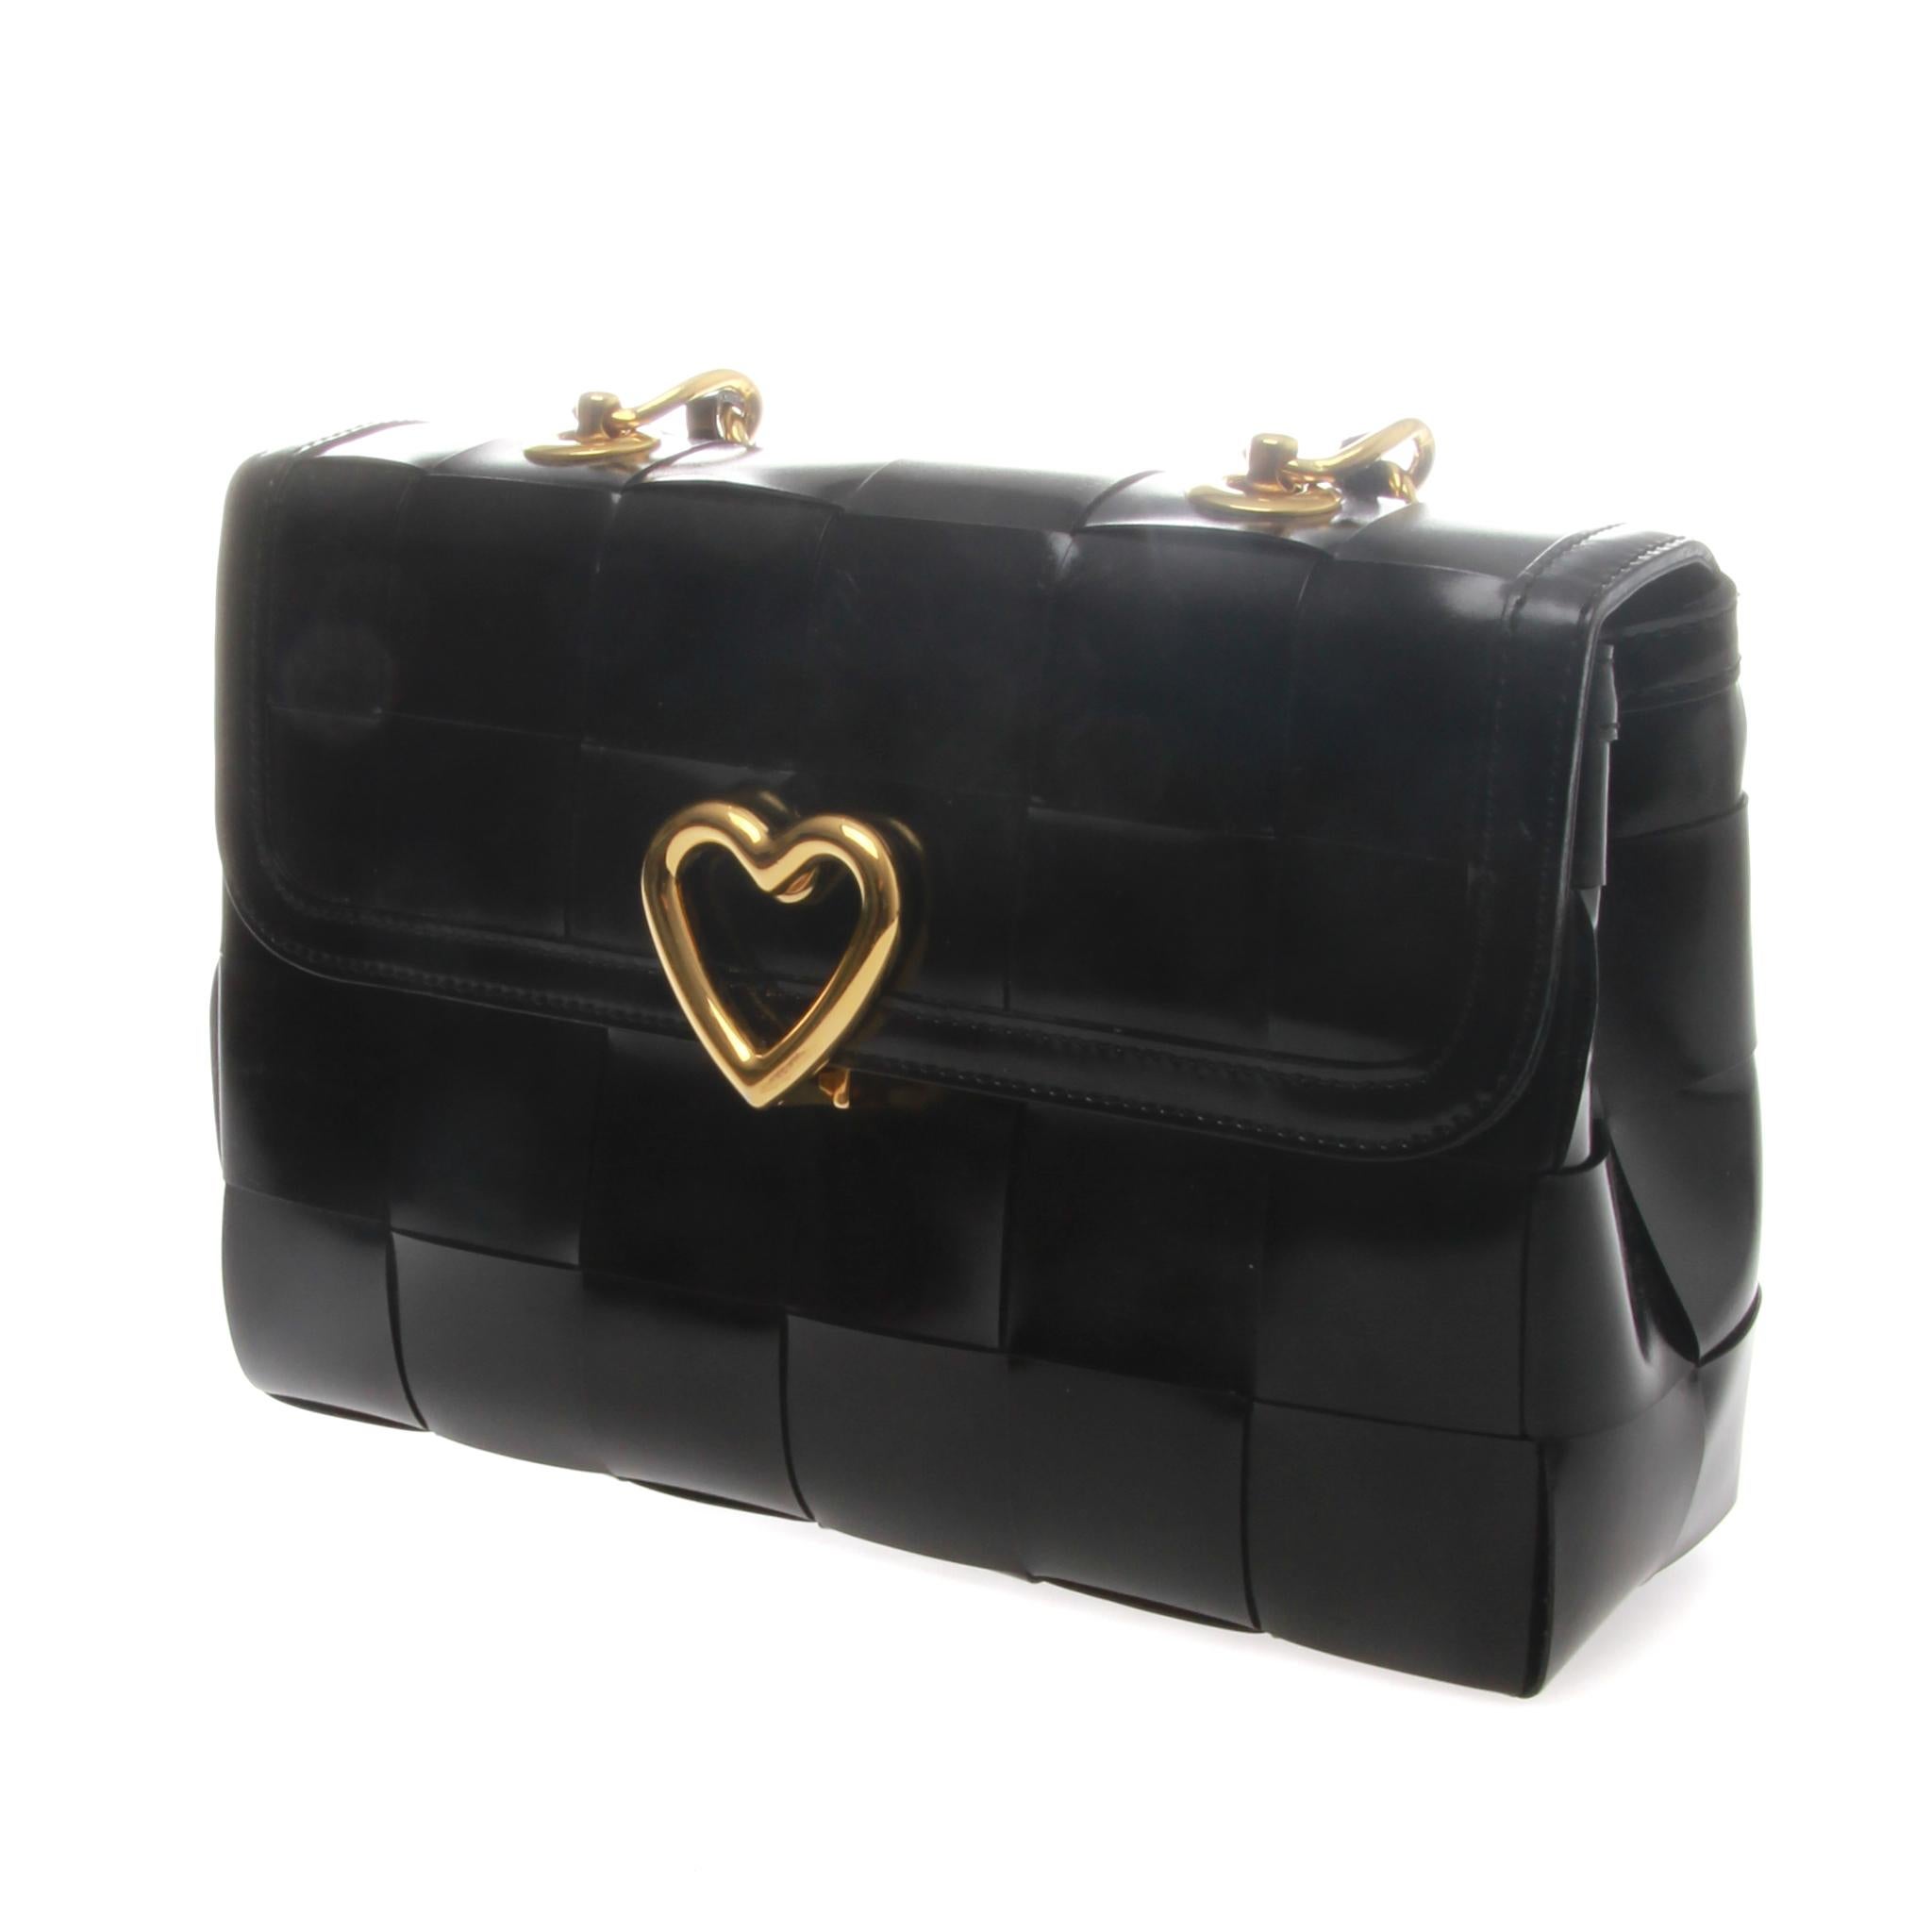 A fabulous-rare Love Moschino Intrecciato Leather Handbag.

It features a braided black leather with a large gold-tone love shaped press button closure and a gold chain trimmed leather strap.
Interior compartment lined with a fabric and a zipped